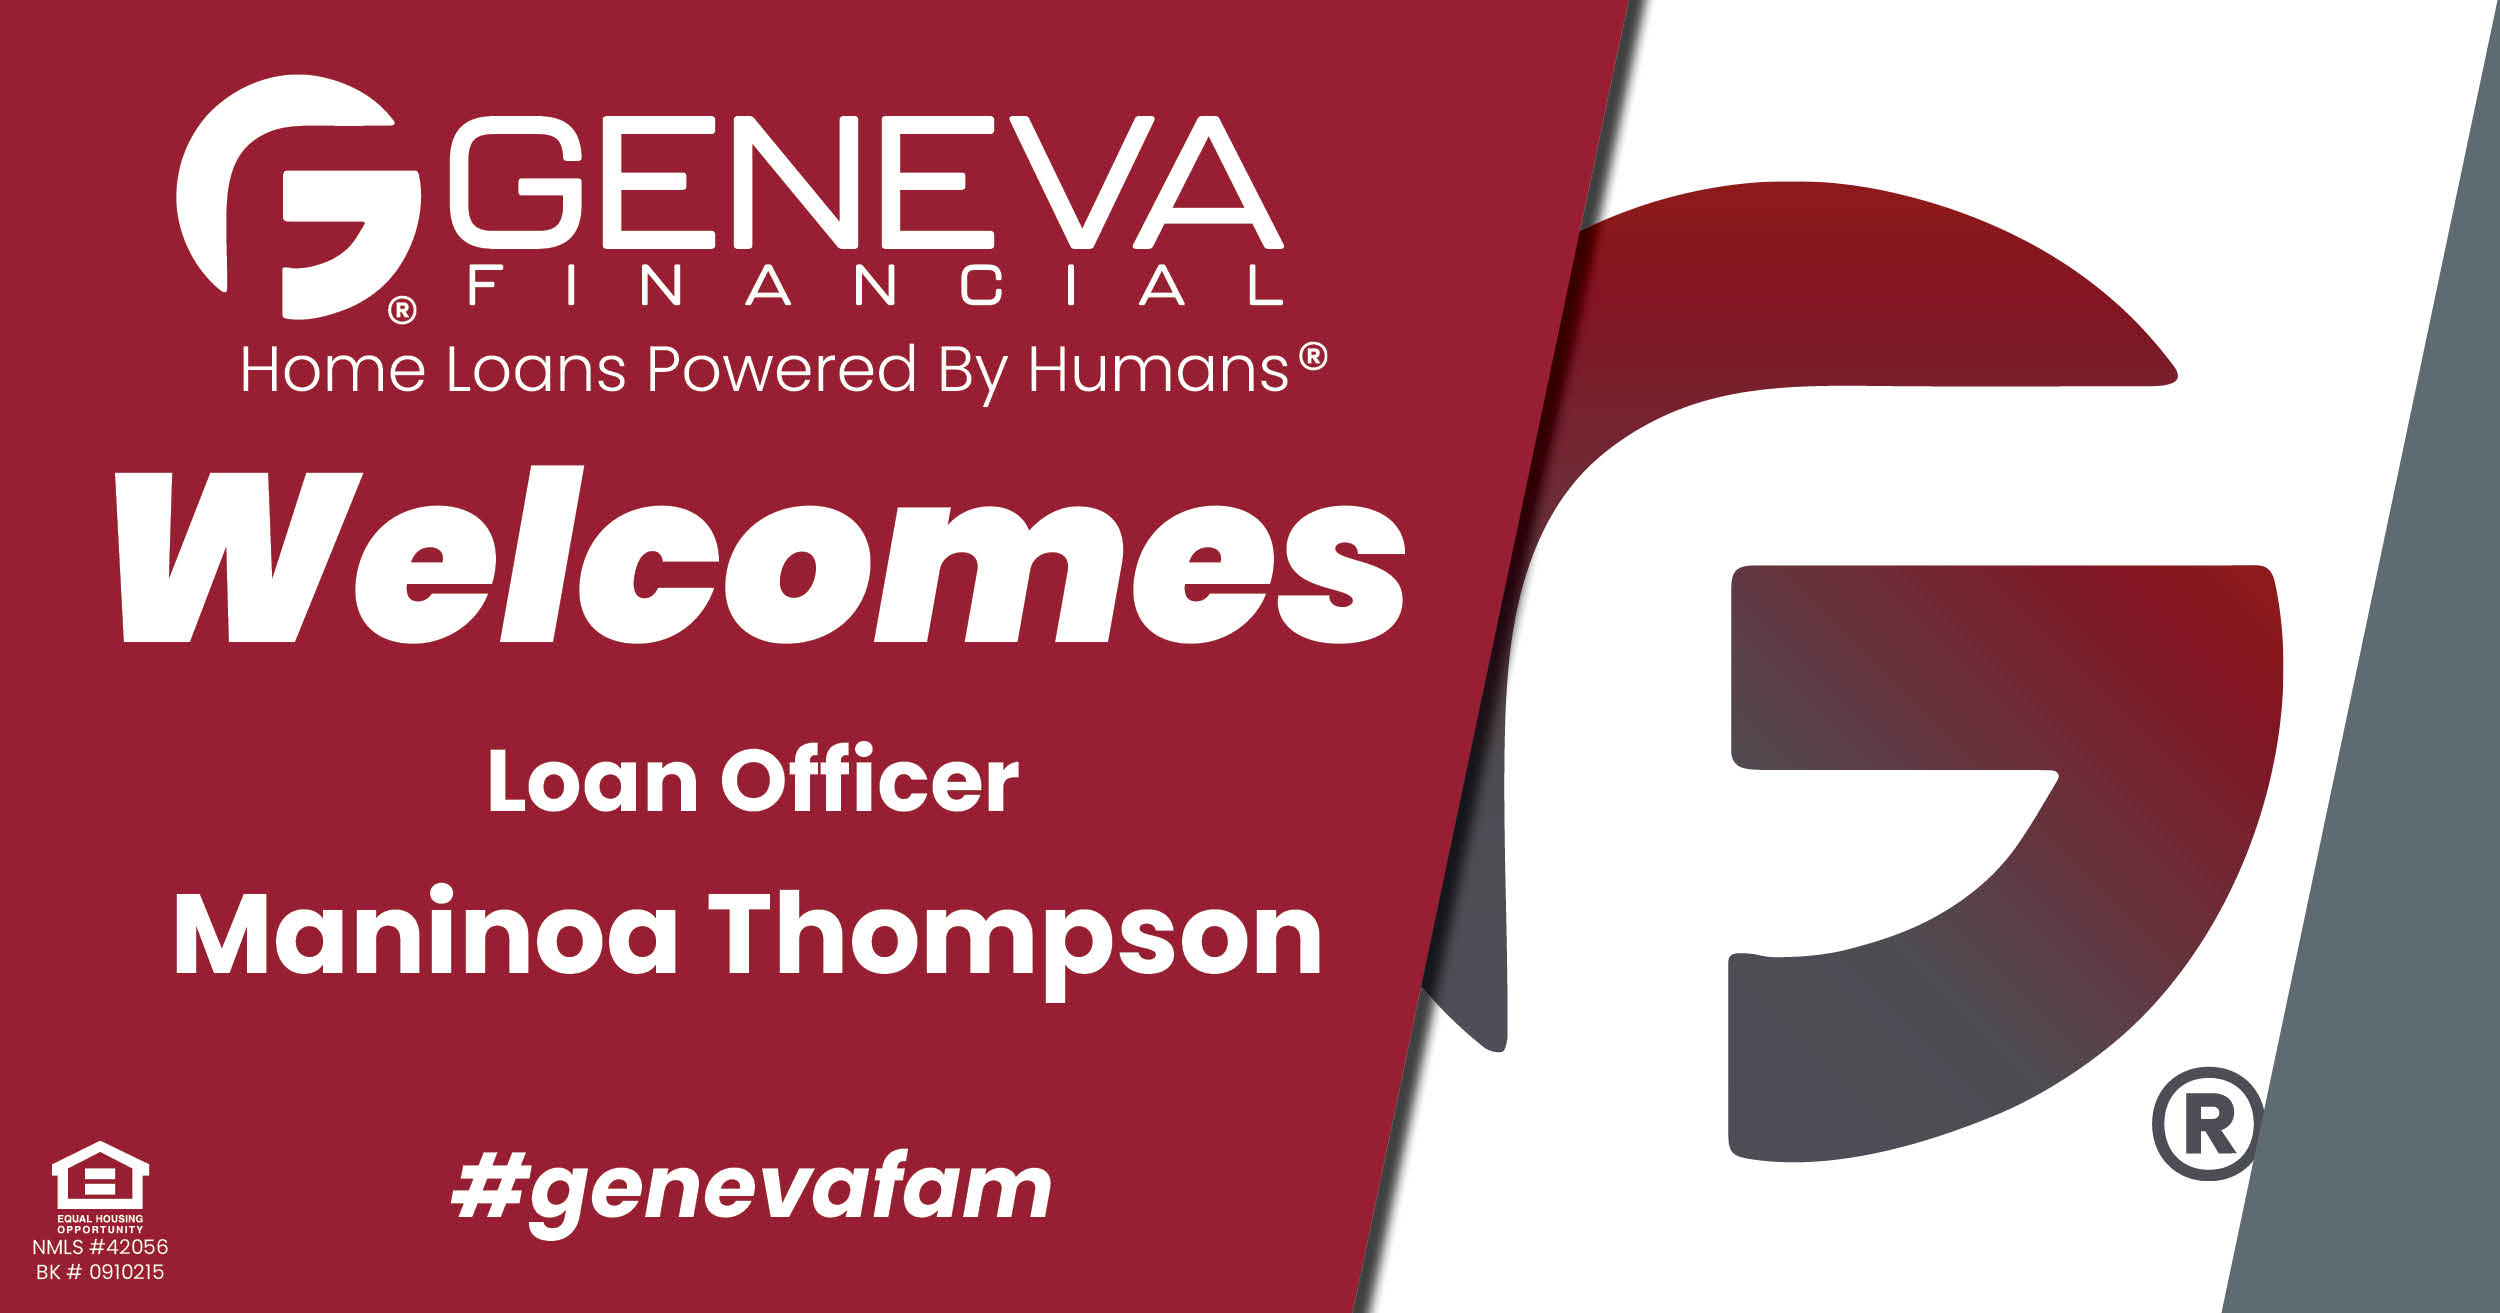 Geneva Financial Welcomes New Loan Officer Maninoa Thompson to Bothell, WA – Home Loans Powered by Humans®.